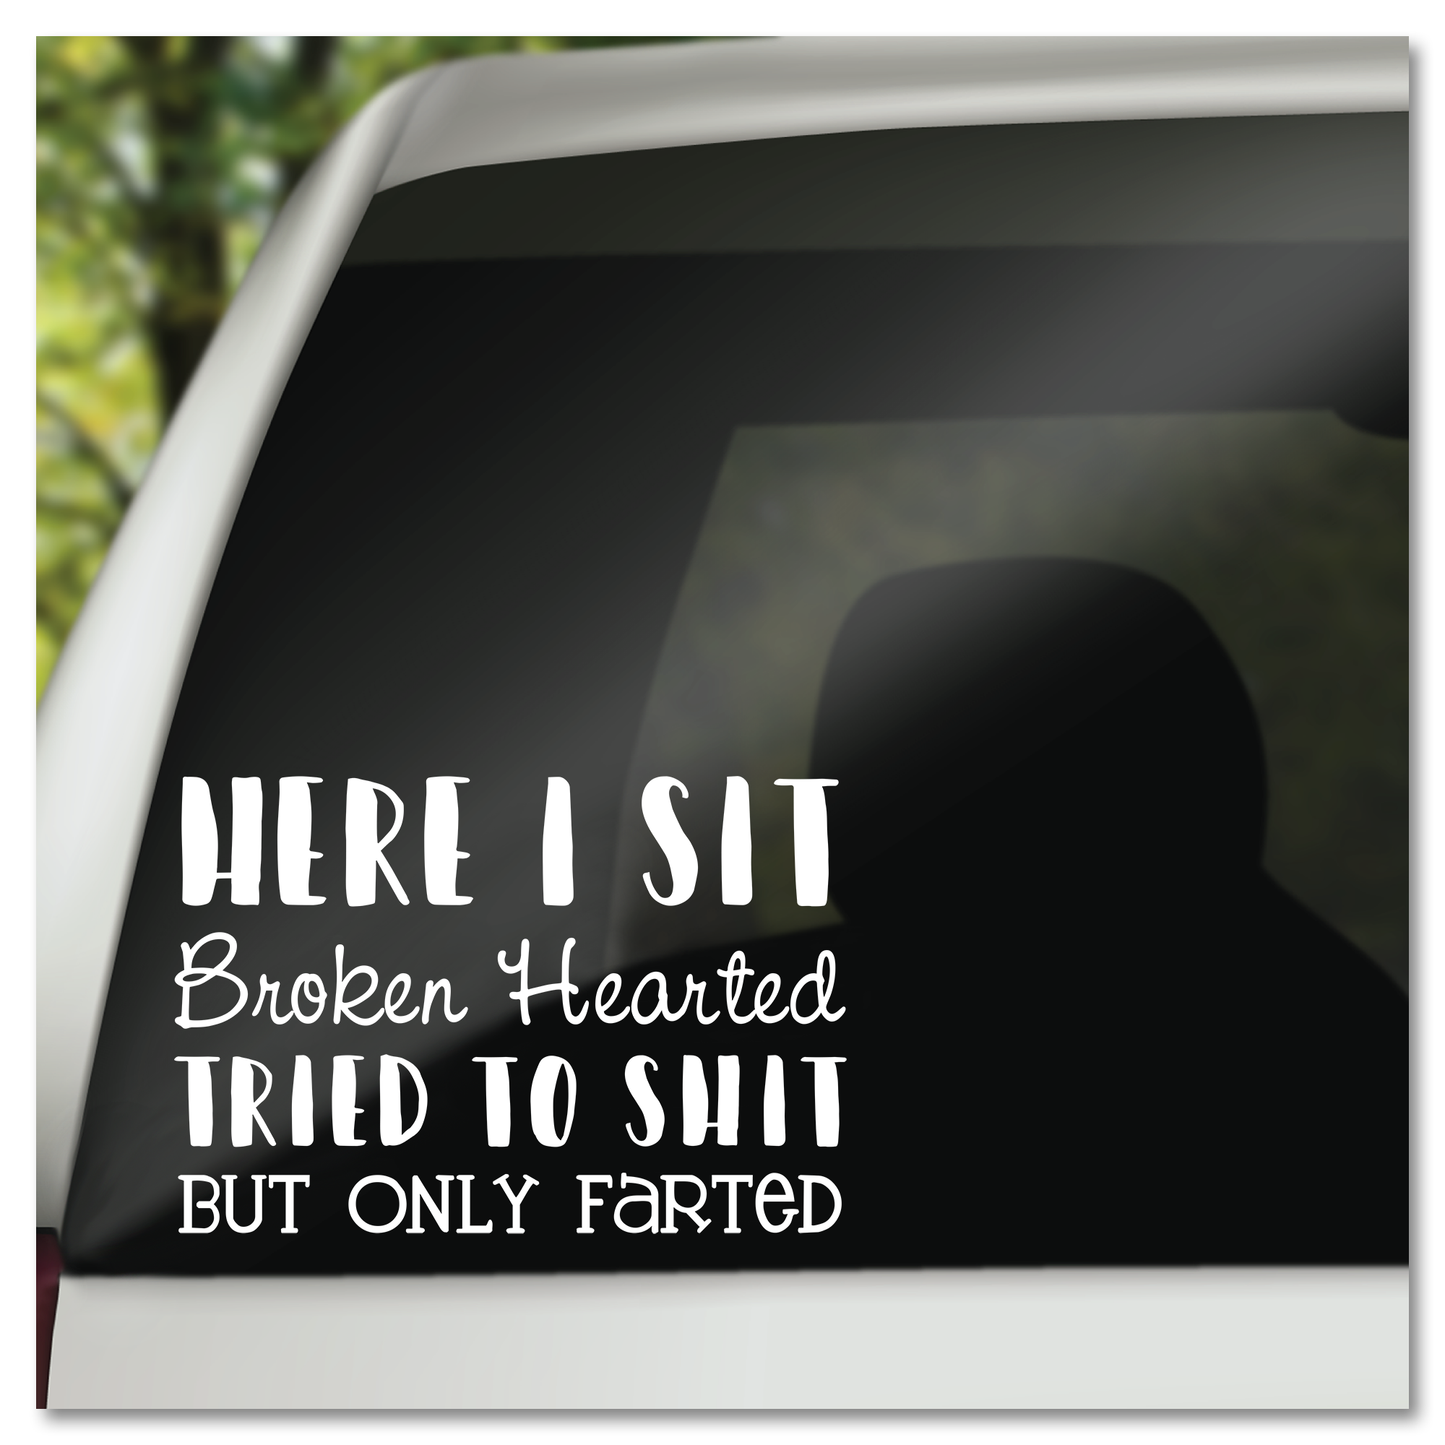 Here I Sit Broken Hearted Tried To Shit But Only Farted Vinyl Decal Sticker